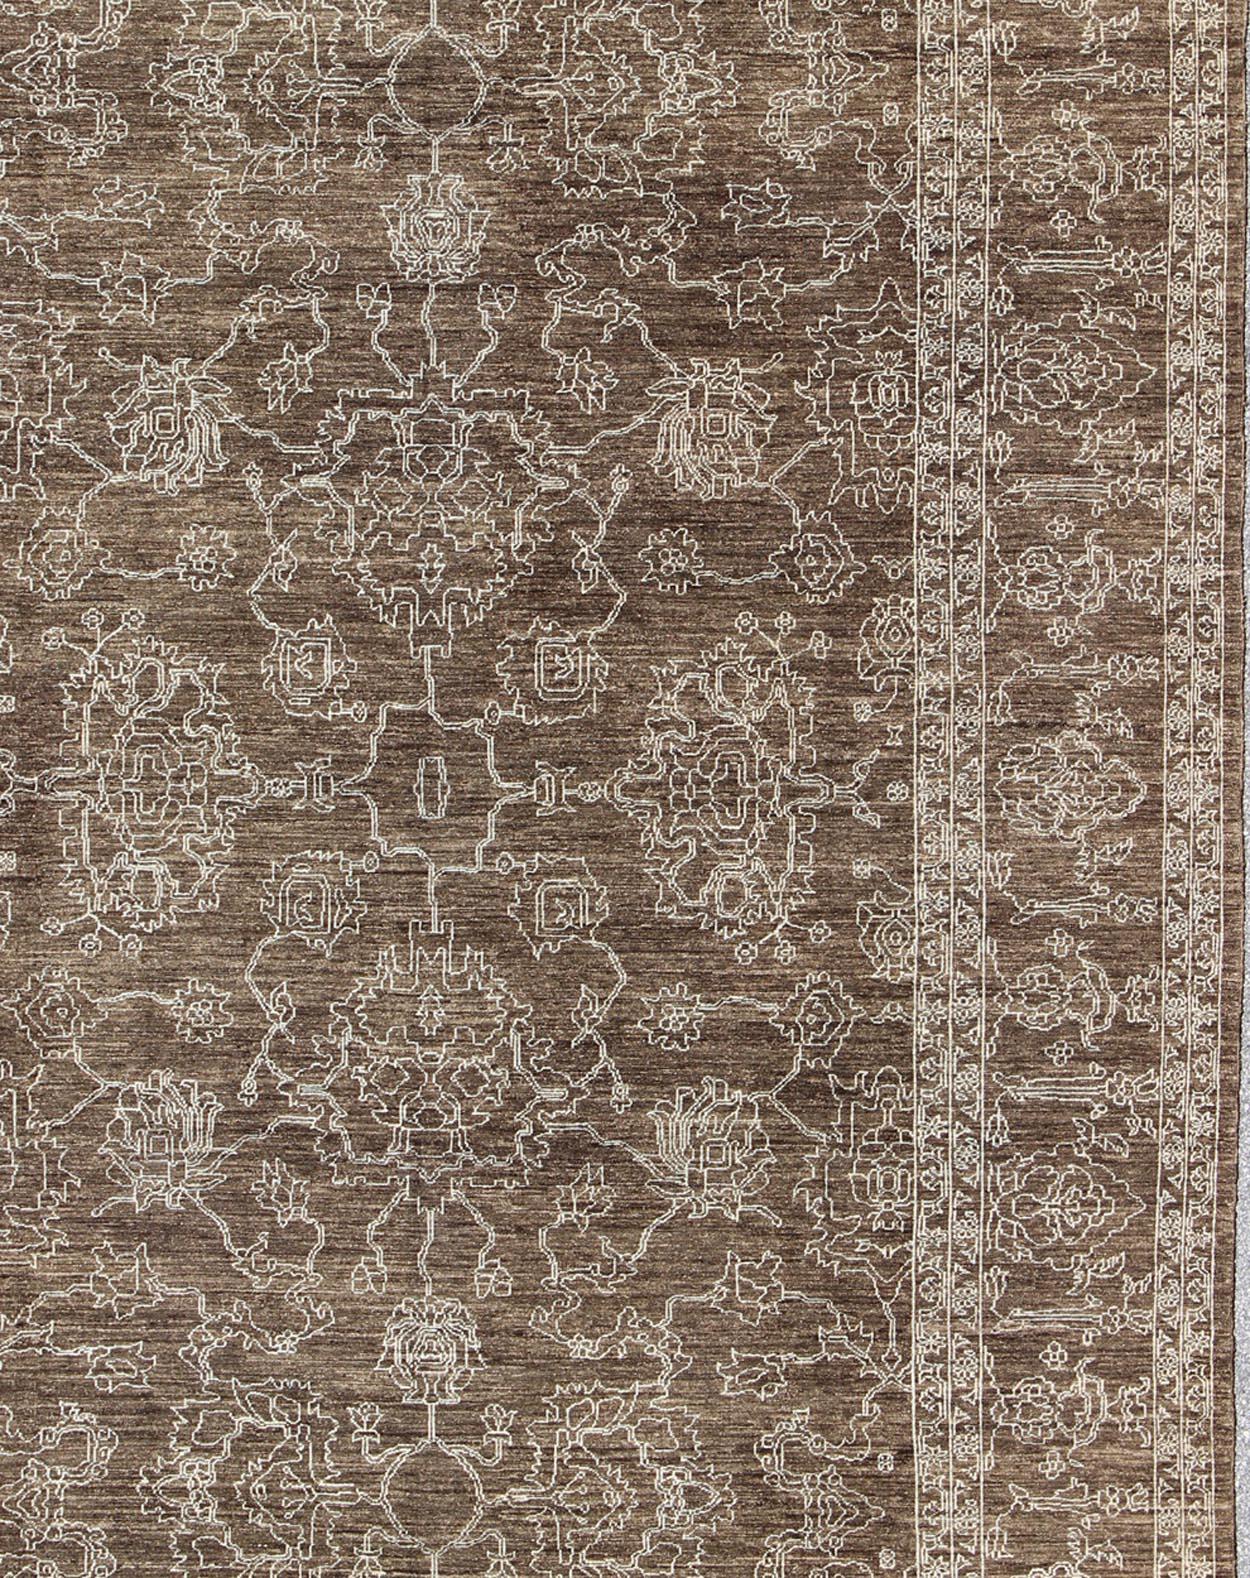 Keivan Woven Arts -Variegated brown and tan in this very finely woven Transitional rug made in Turkey with tan highlights, rug AN-110430, country of origin / type: Turkey / Tribal

This fine Turkish rug features a transitional design of stylized